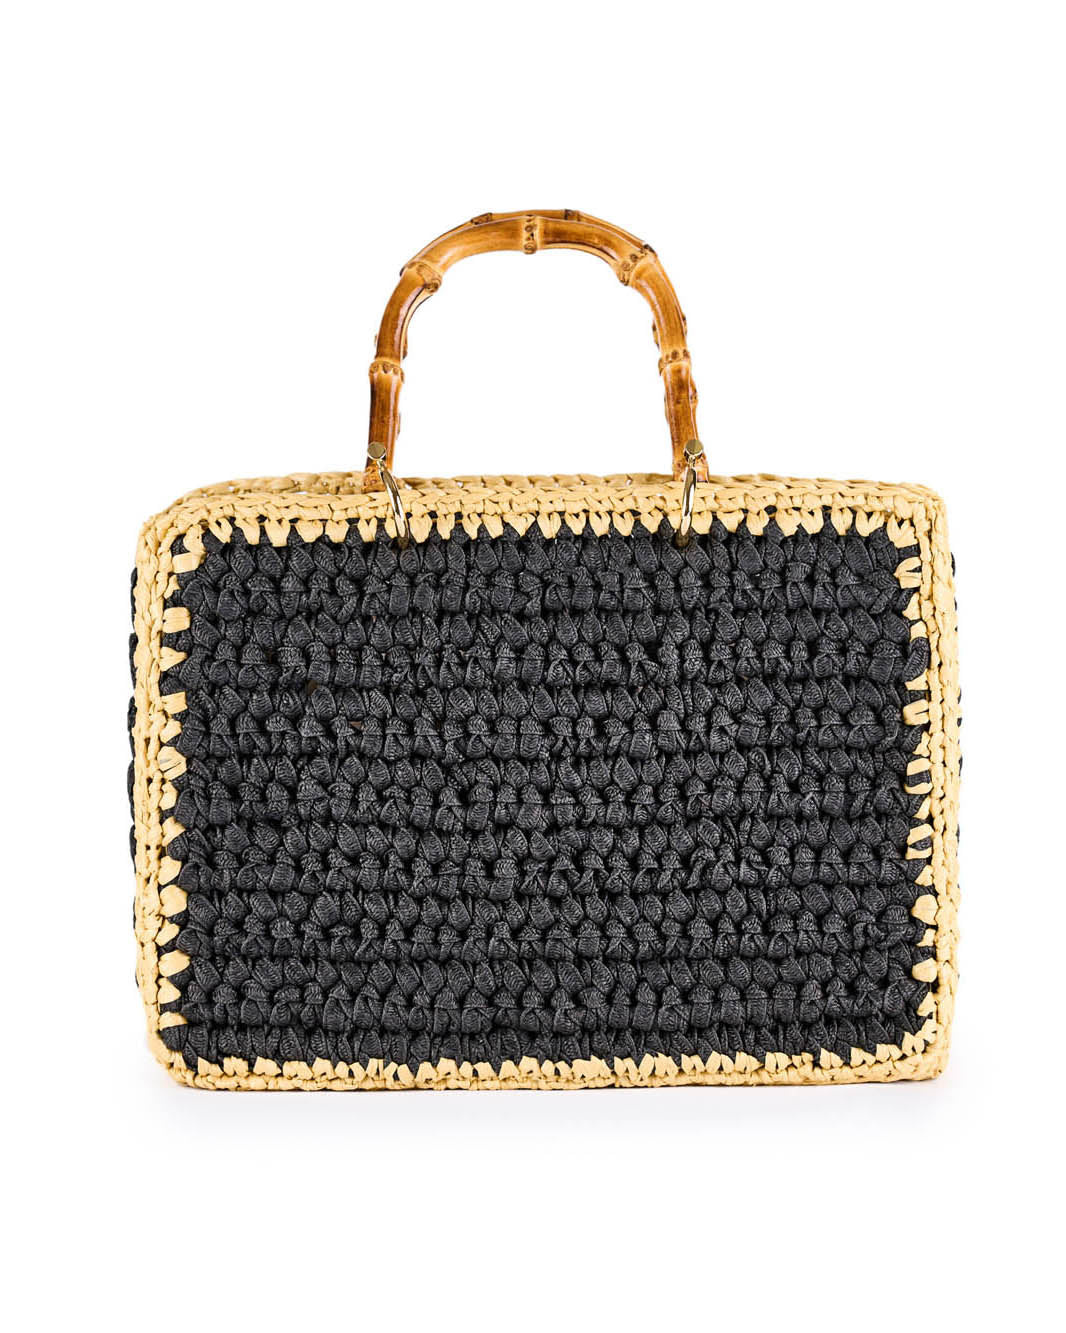 Handcrafted woven straw handbag with black crochet pattern and bamboo handles